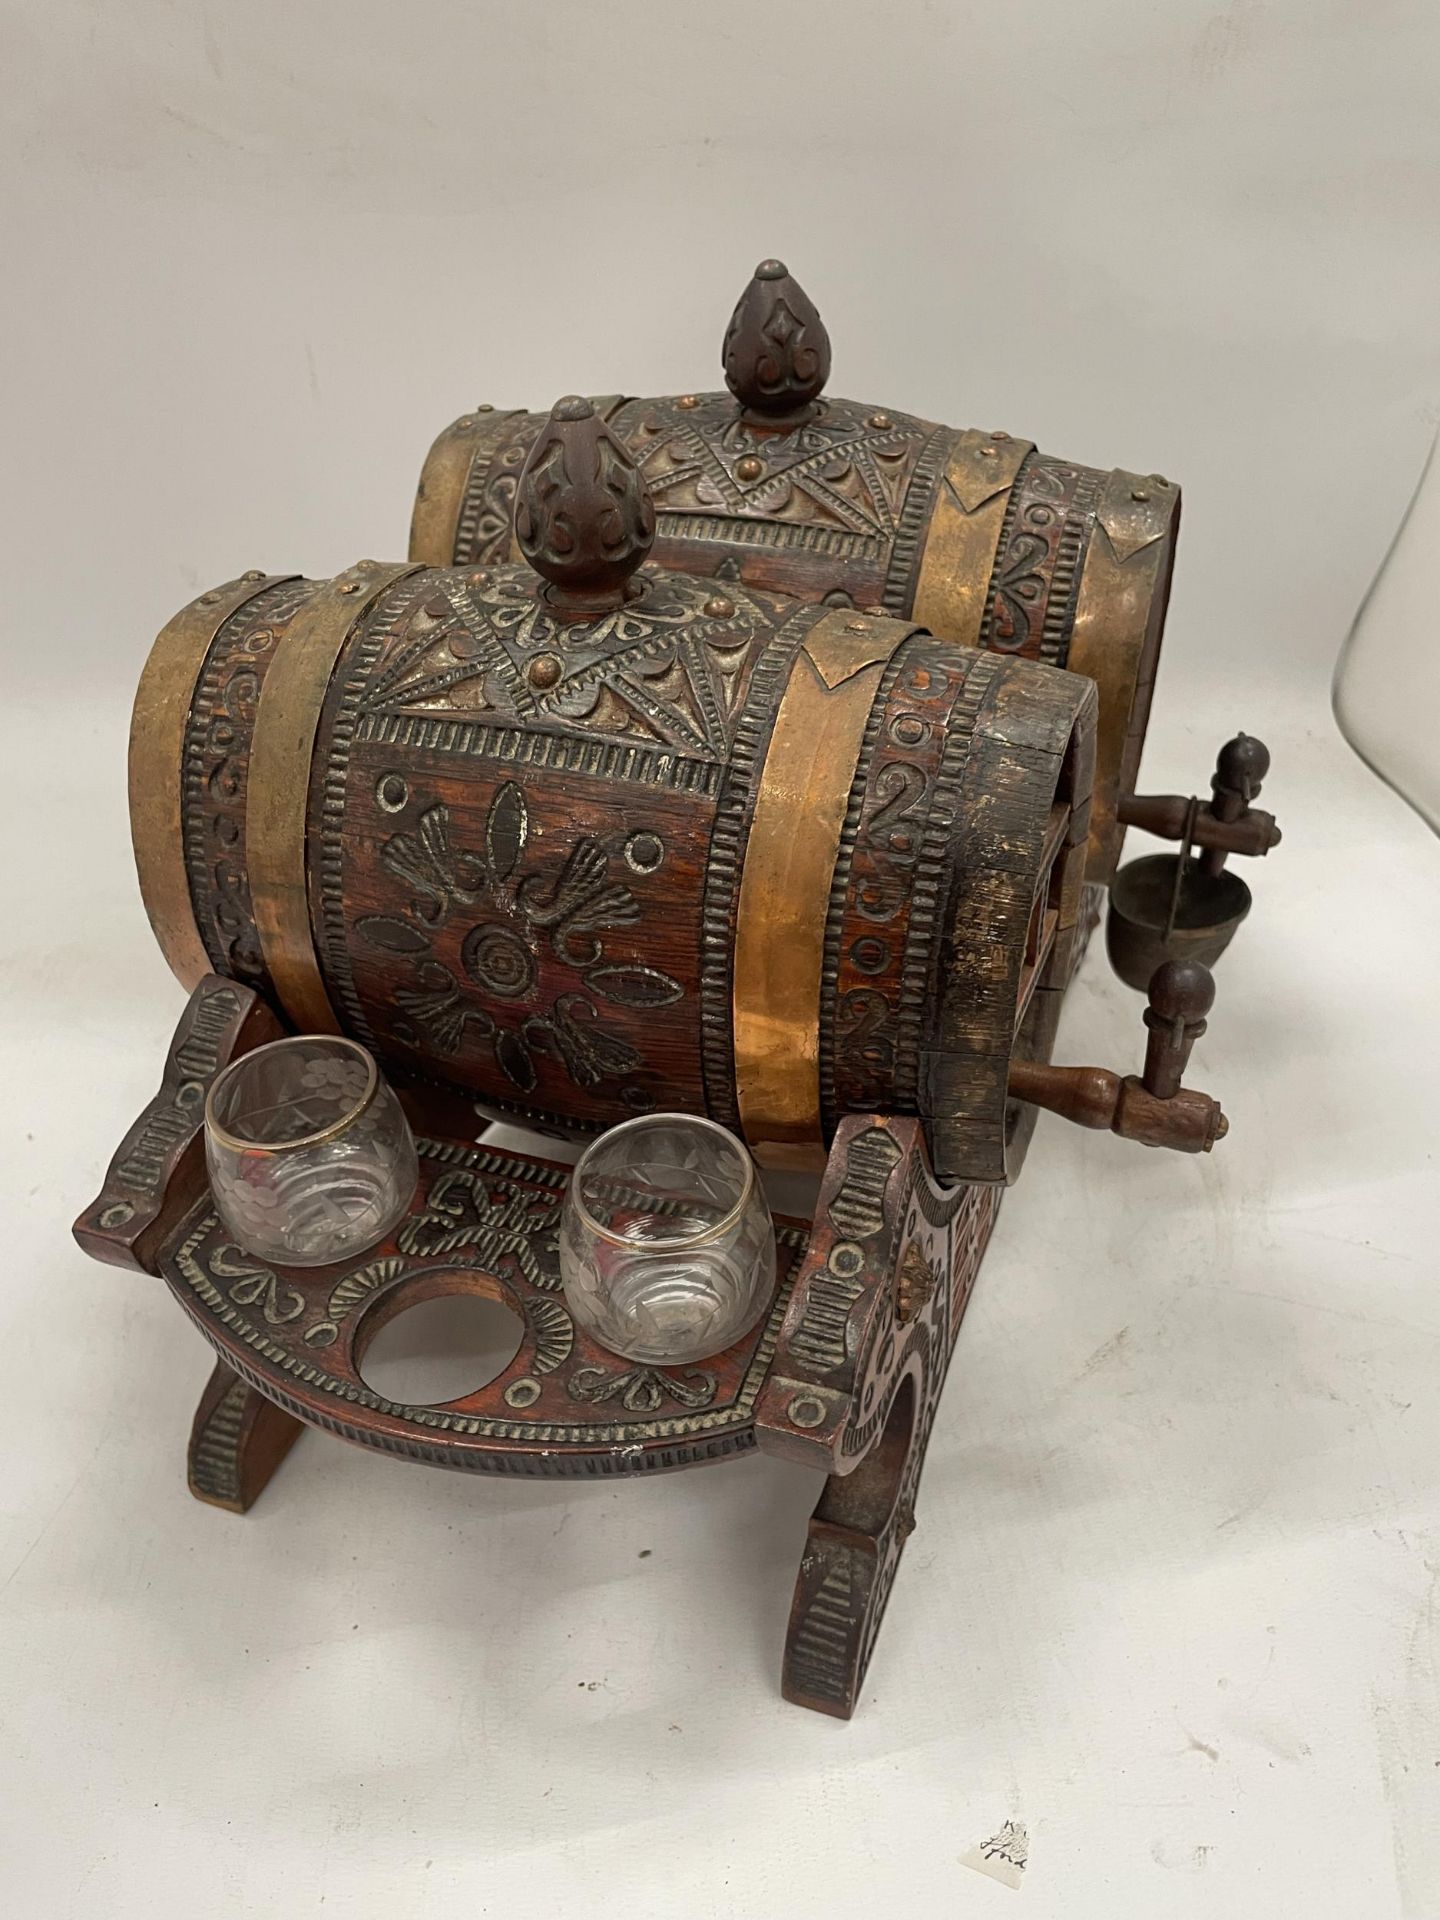 A VINTAGE CARVED WOODEN NORTH AFRICAN DRINKS DISPENSER WITH GLASSES - Image 2 of 4